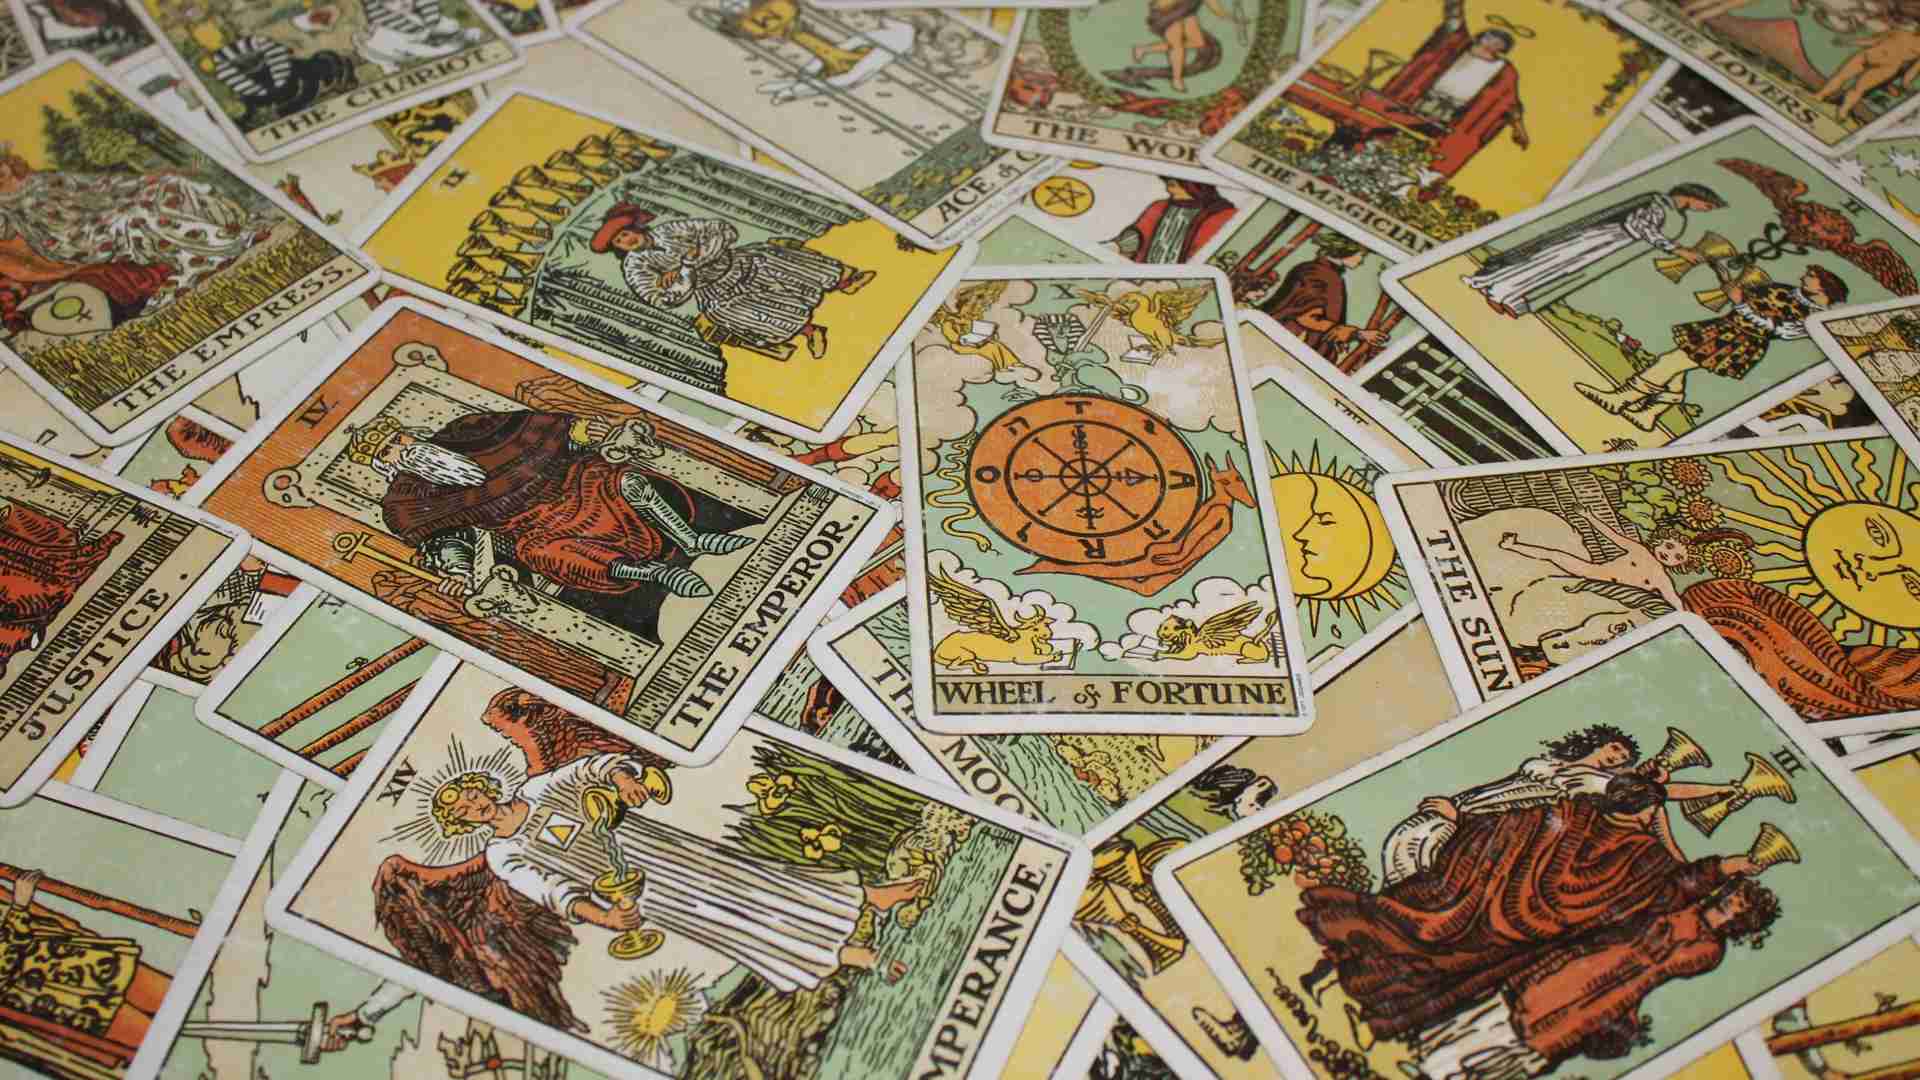 What does the Wheel of Fortune Tarot Card